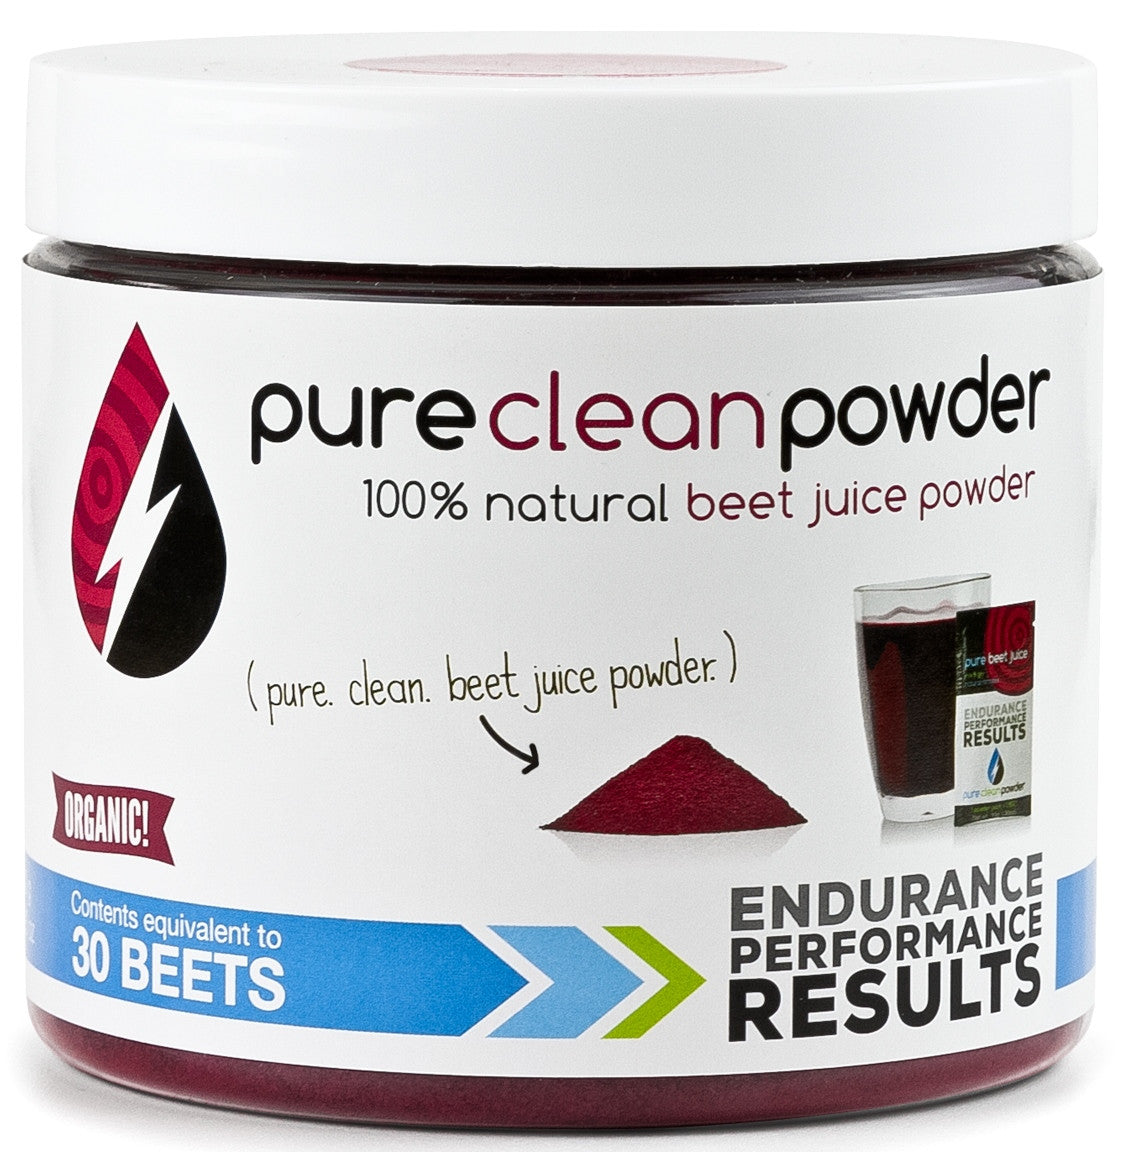 Pure Clean Powder - 100% Natural Beet Juice Powder - 30 Serving Canister